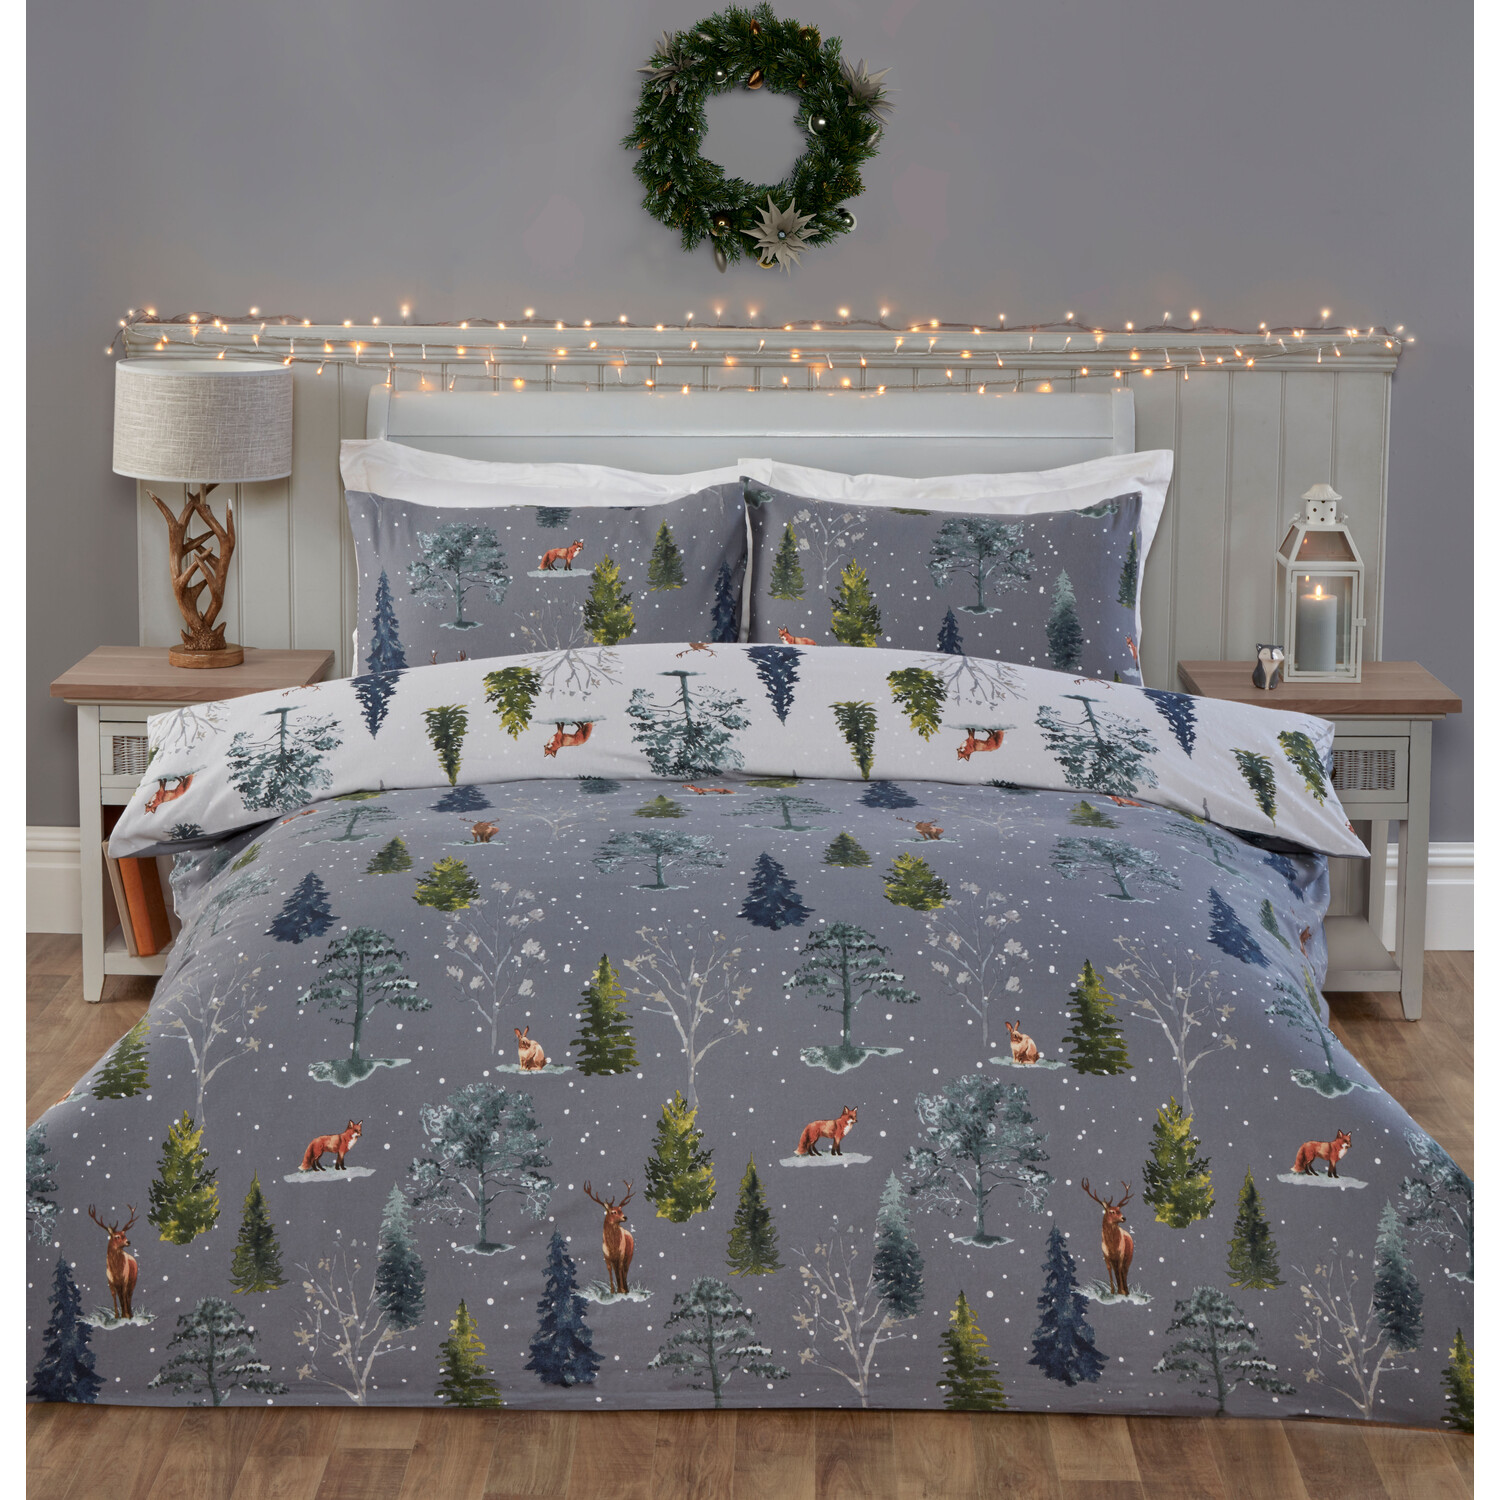 Snowy Forest Duvet Cover and Pillowcase Set - Grey / King Image 1